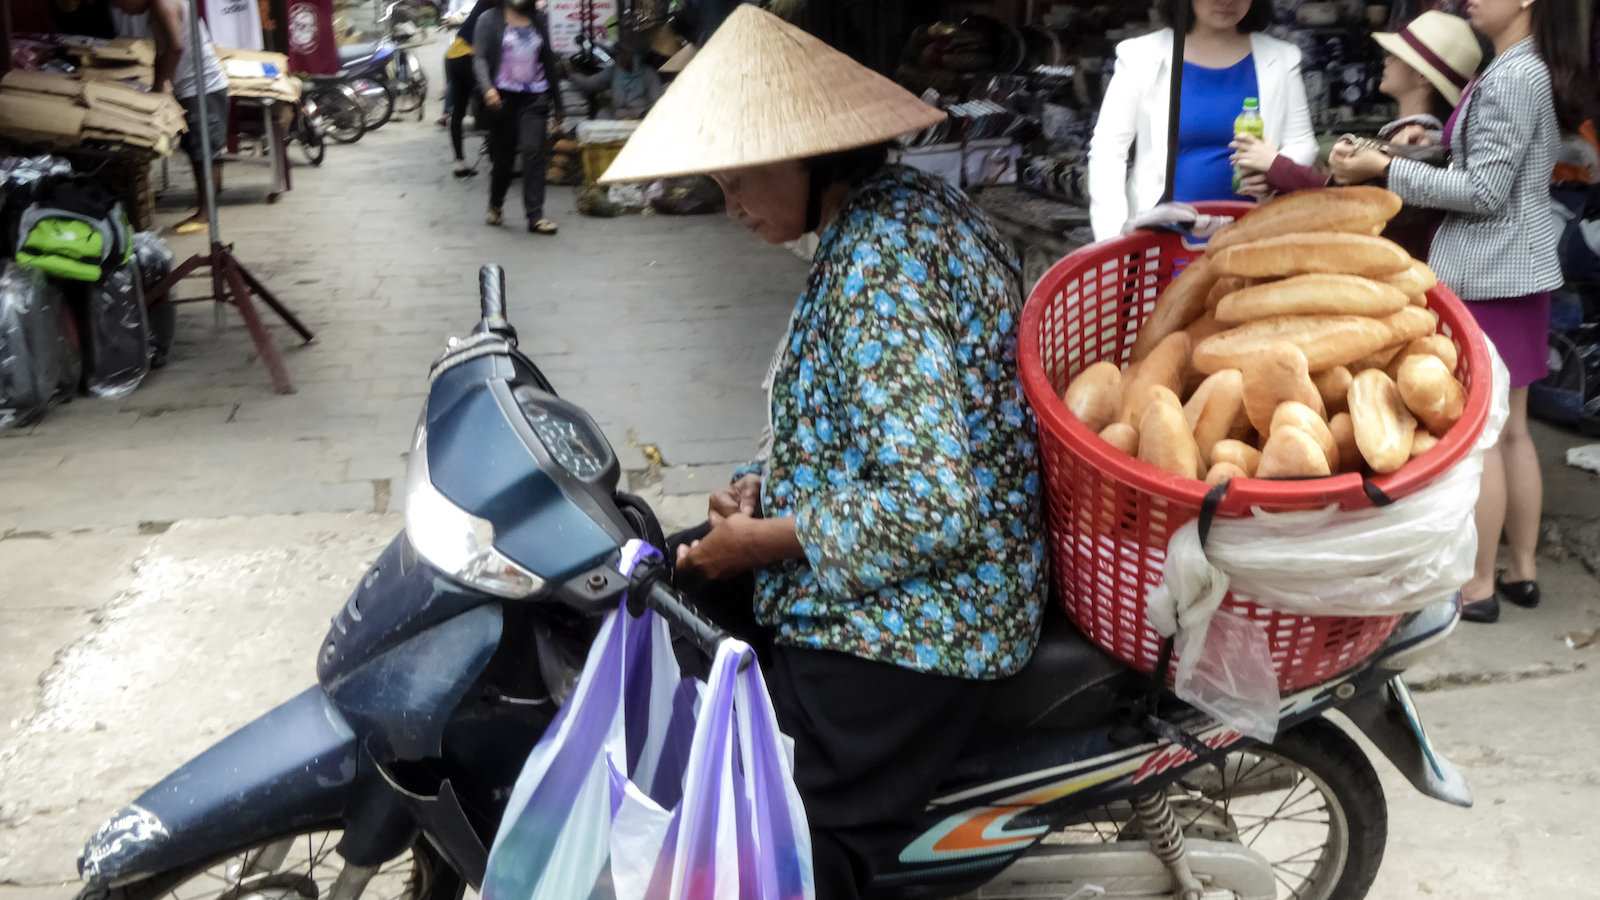 Banh mi is Vietnam's version of the French baguette but so uniquely Vietnamese